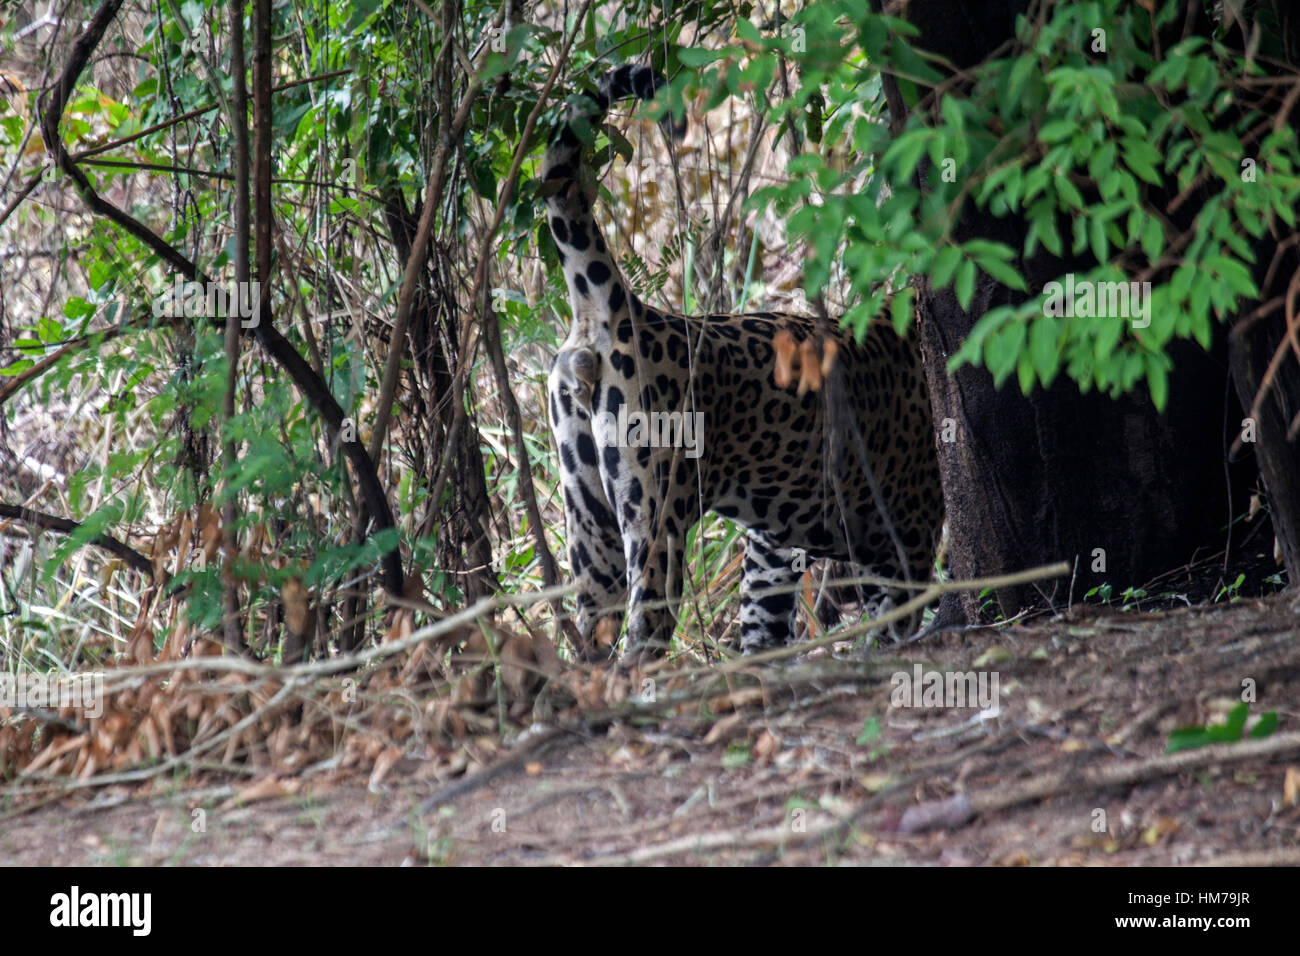 Jaguar spraying scent onto the surrounding vegetation from its scent gland situated beneath its tail in Brazil Stock Photo